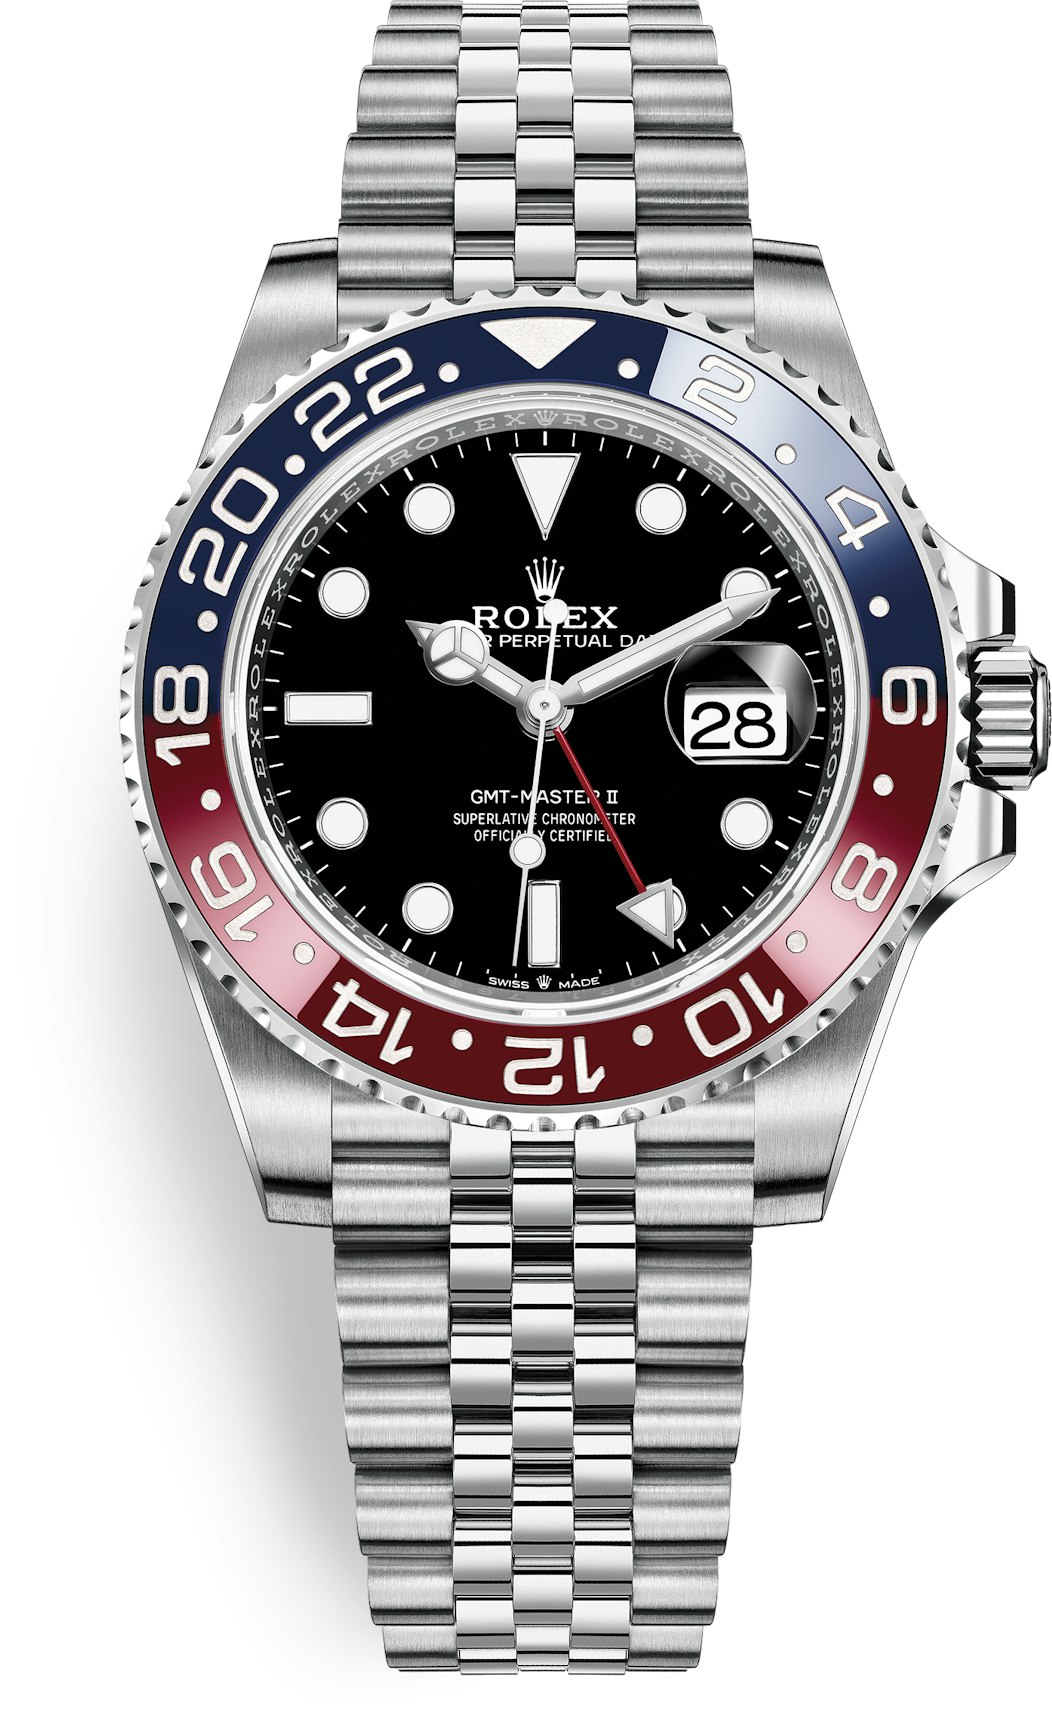 Rolex GMT-Master II 126710BLRO - 40mm in Stainless Steel - US